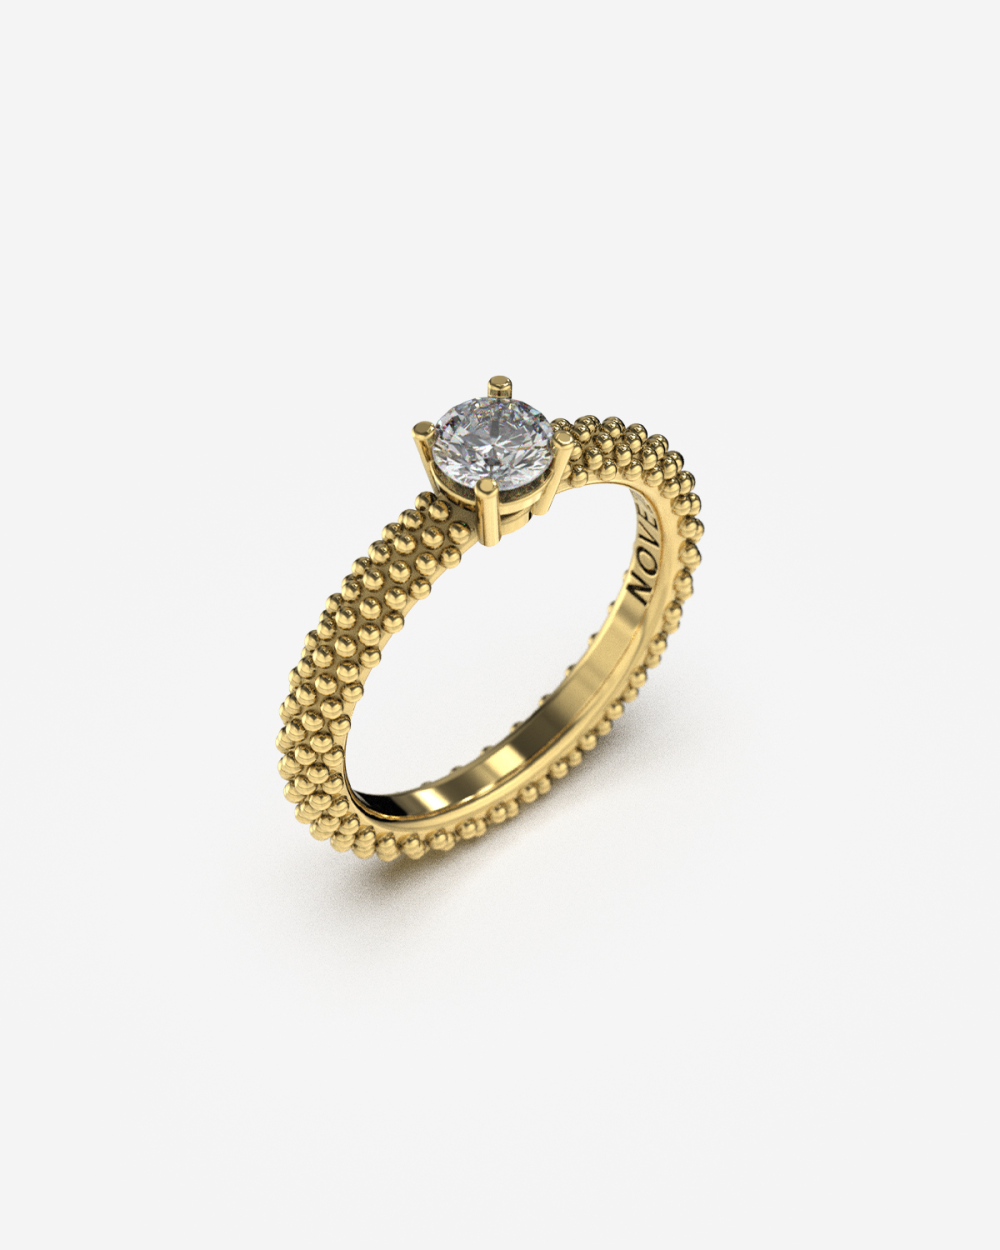 GOLD DOTTED SOLITAIRE ENGAGEMENT RING